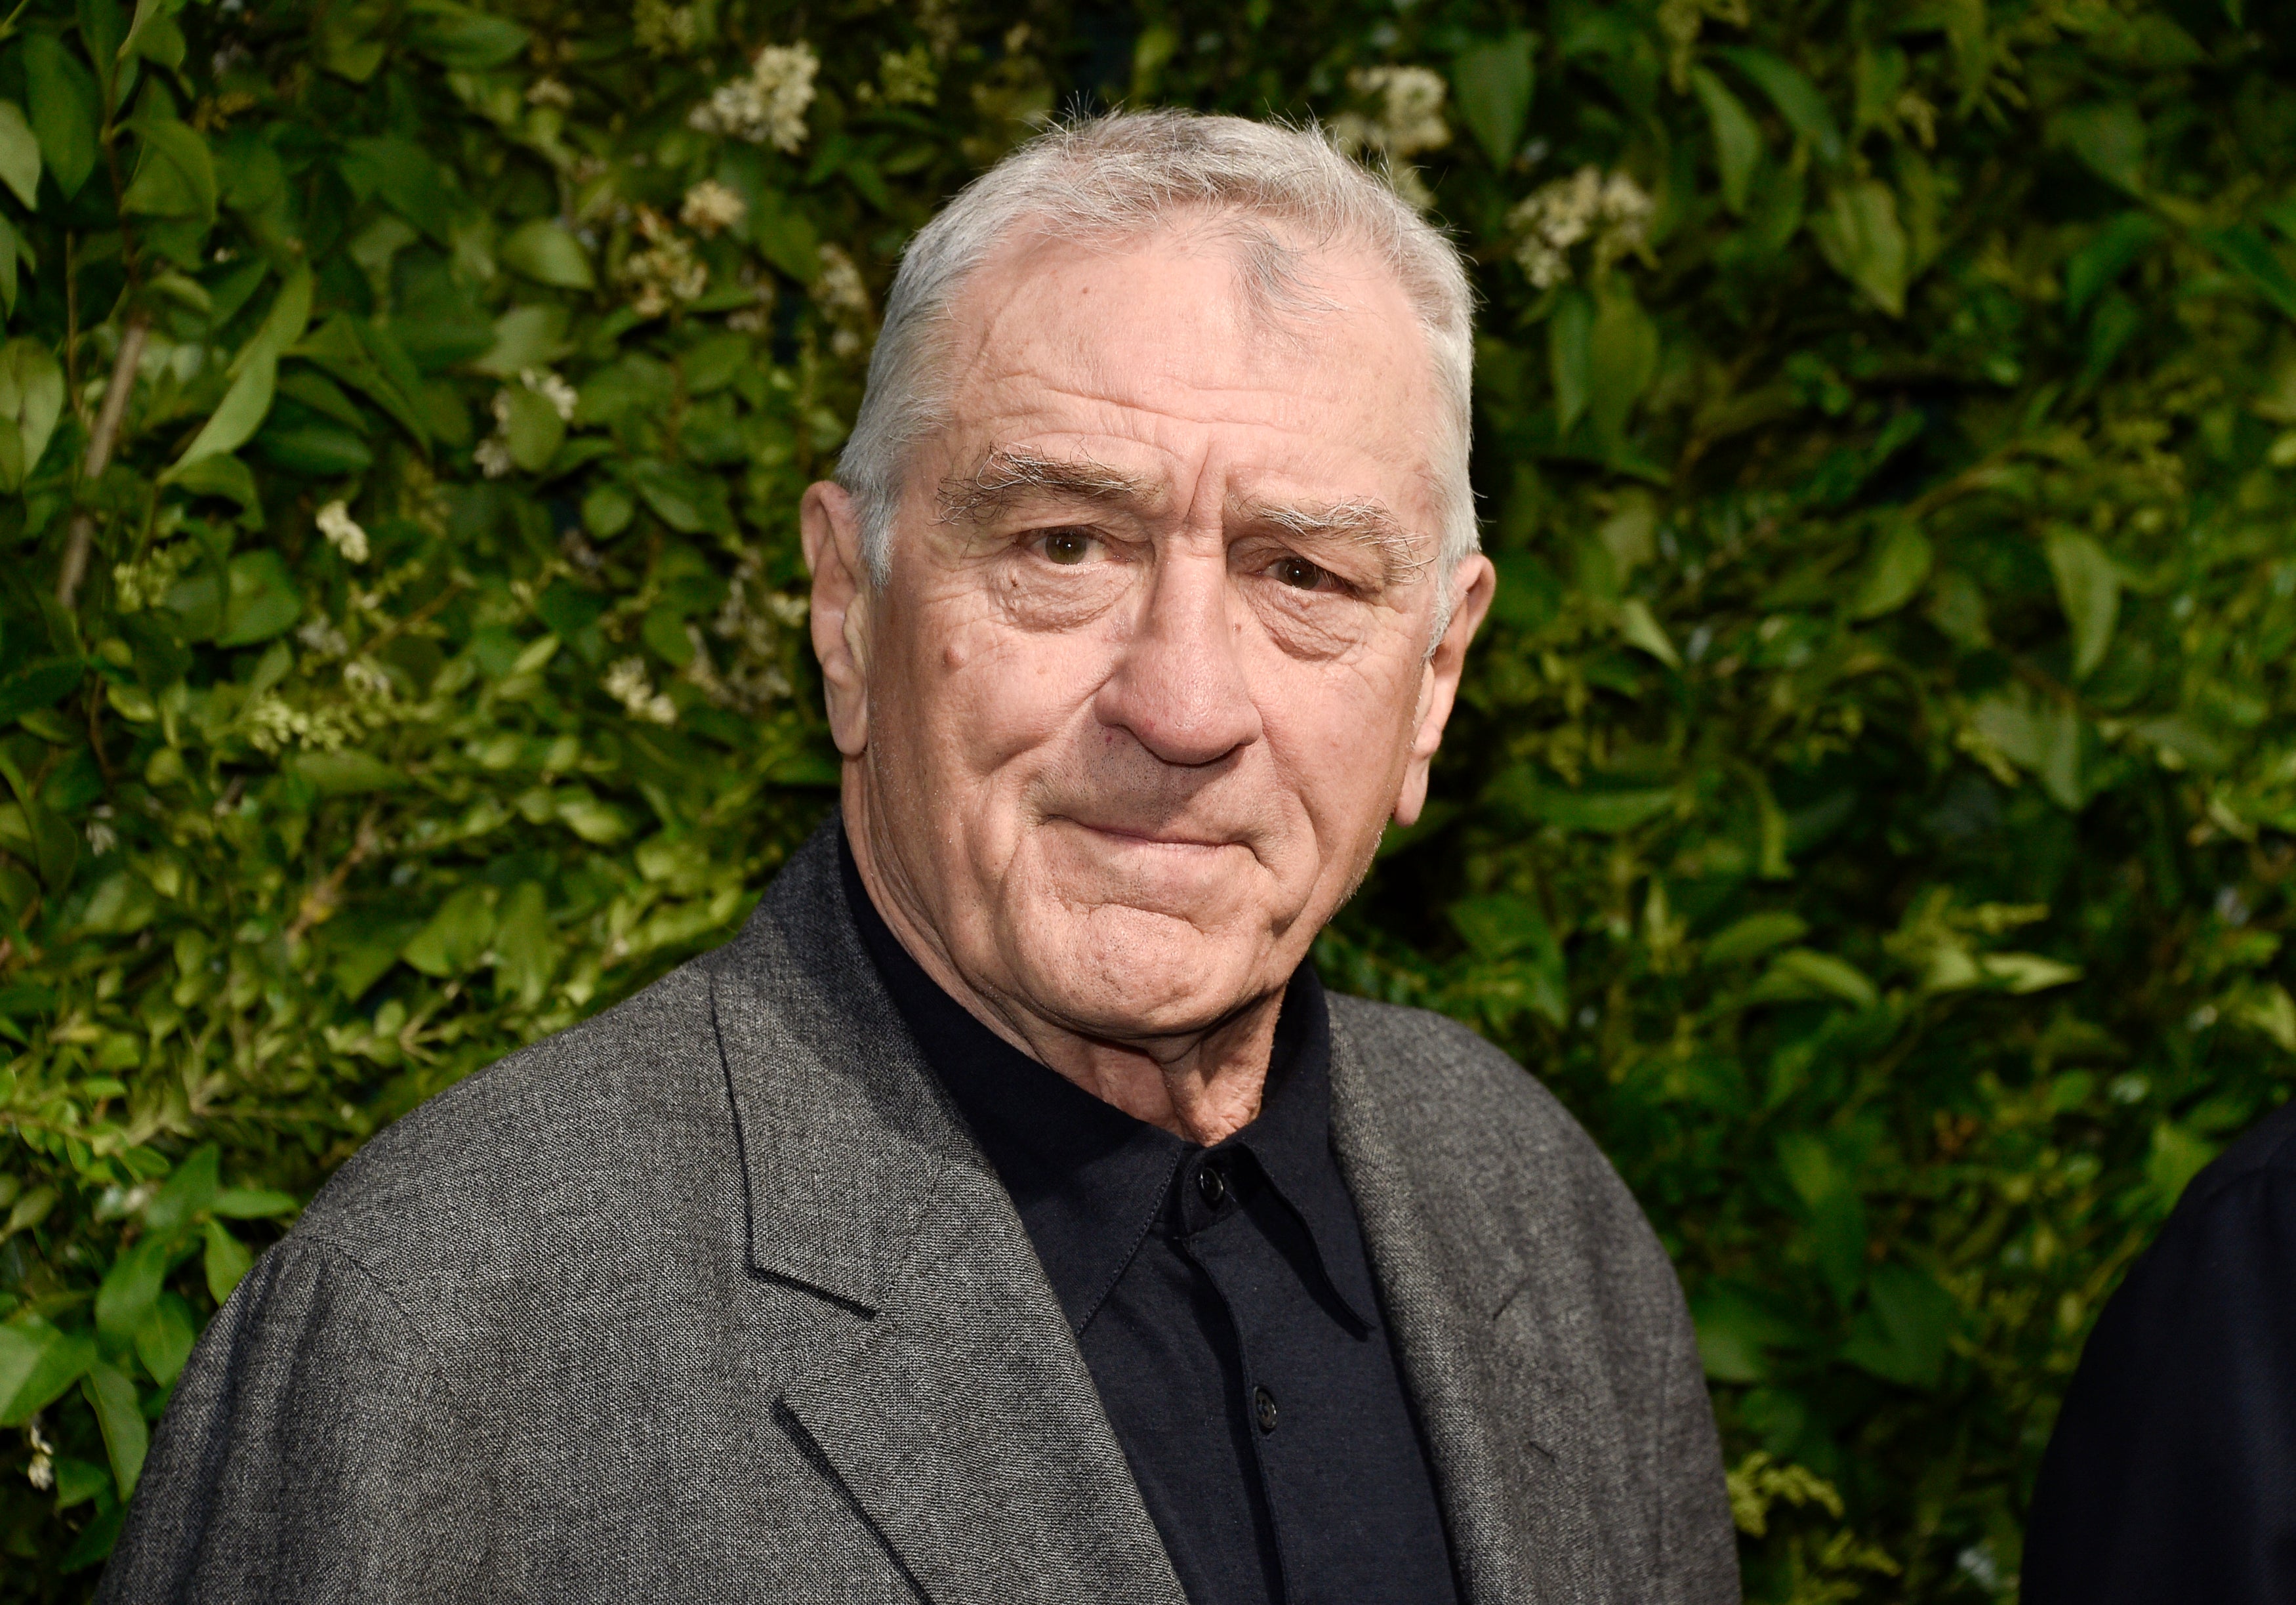 Its selfish to have a child at 79, Mr De Niro image